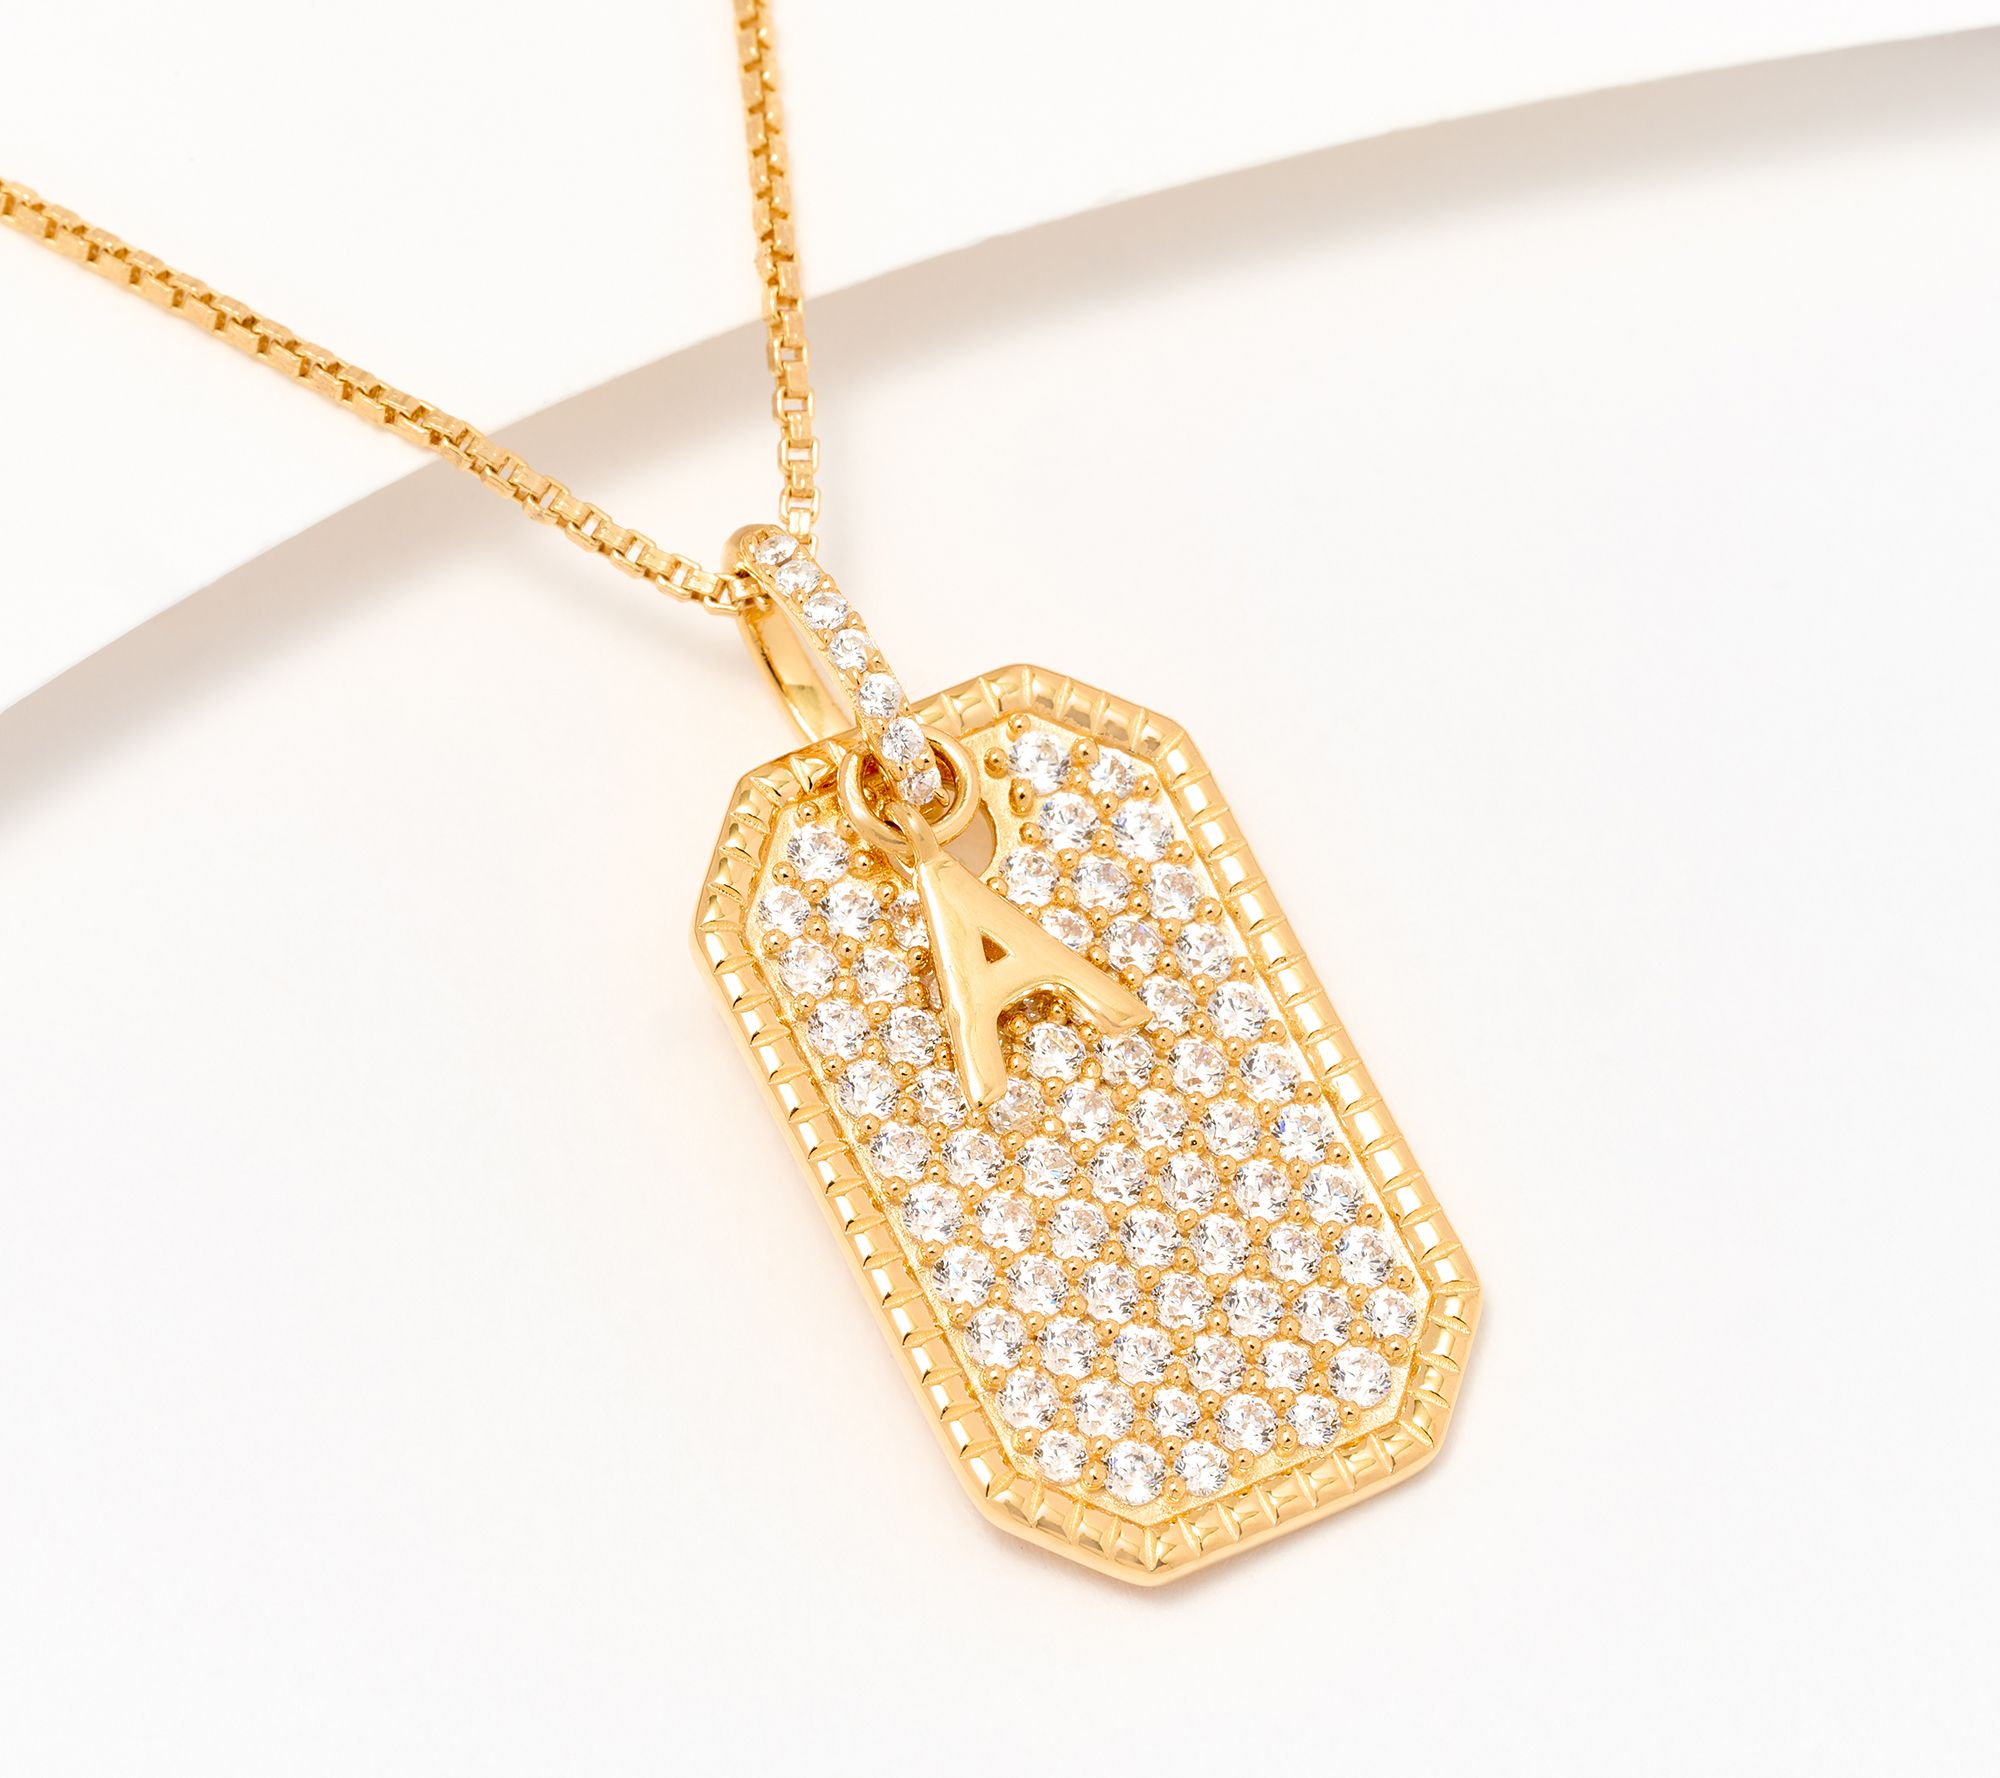 Military Dog Tag Pendant 14K Yellow Gold / None